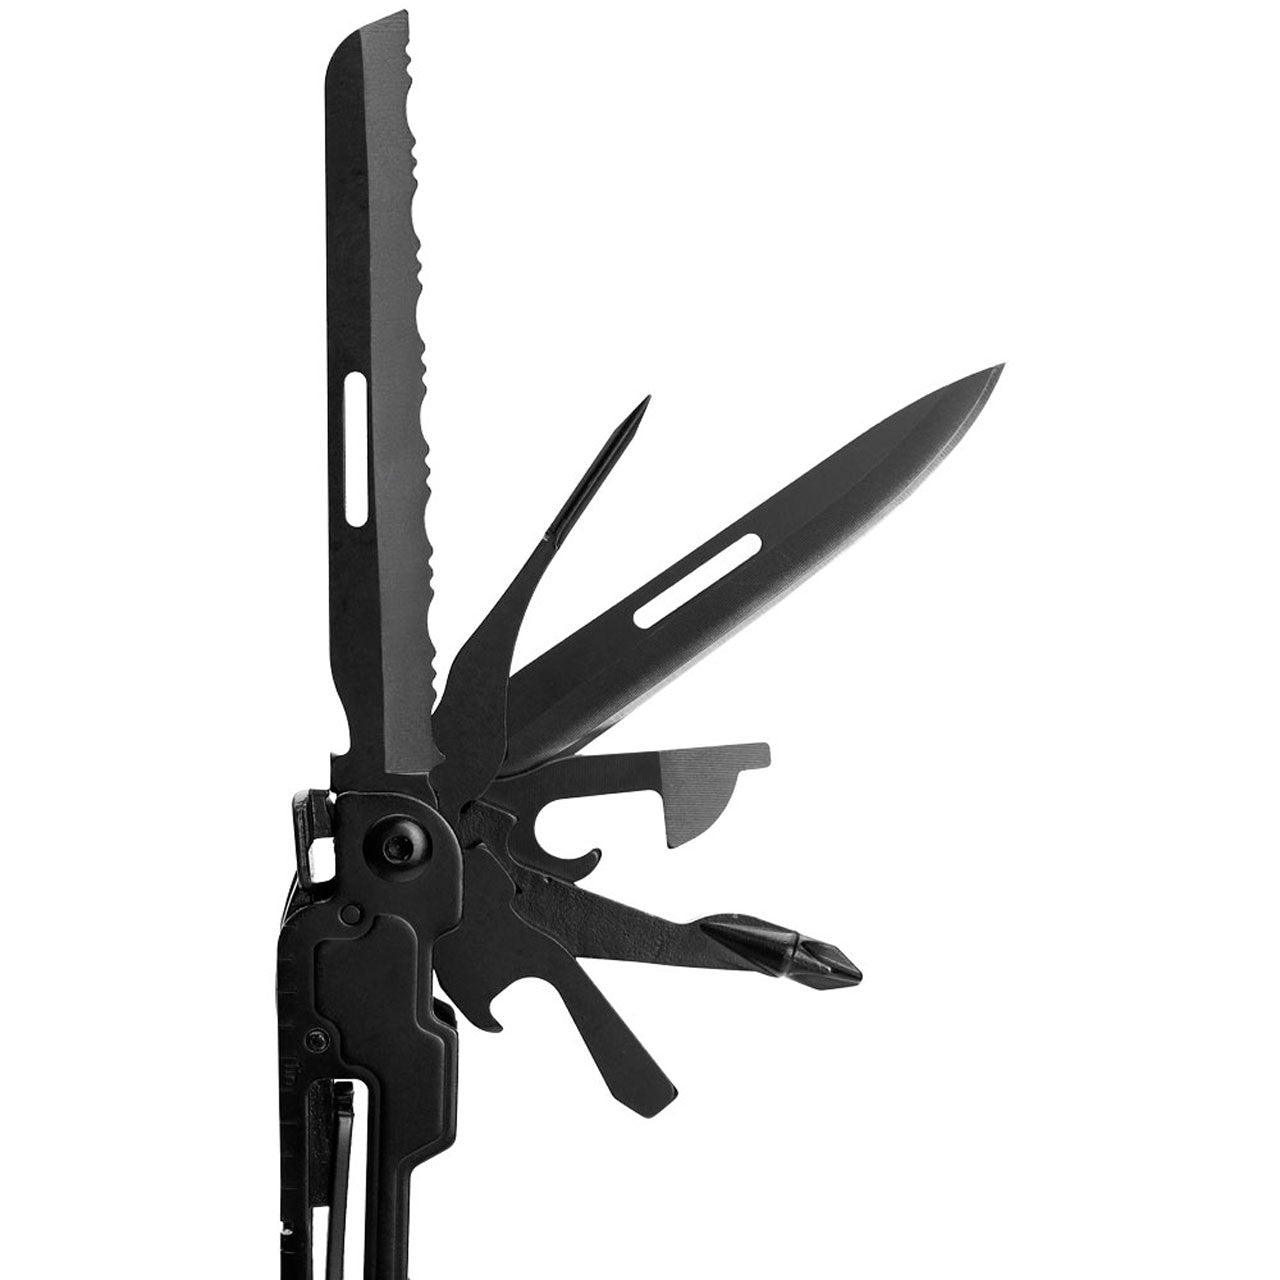 SOG PowerAccess Deluxe Black 21-Tool Multi-Tool with Bit Kit and Sheath